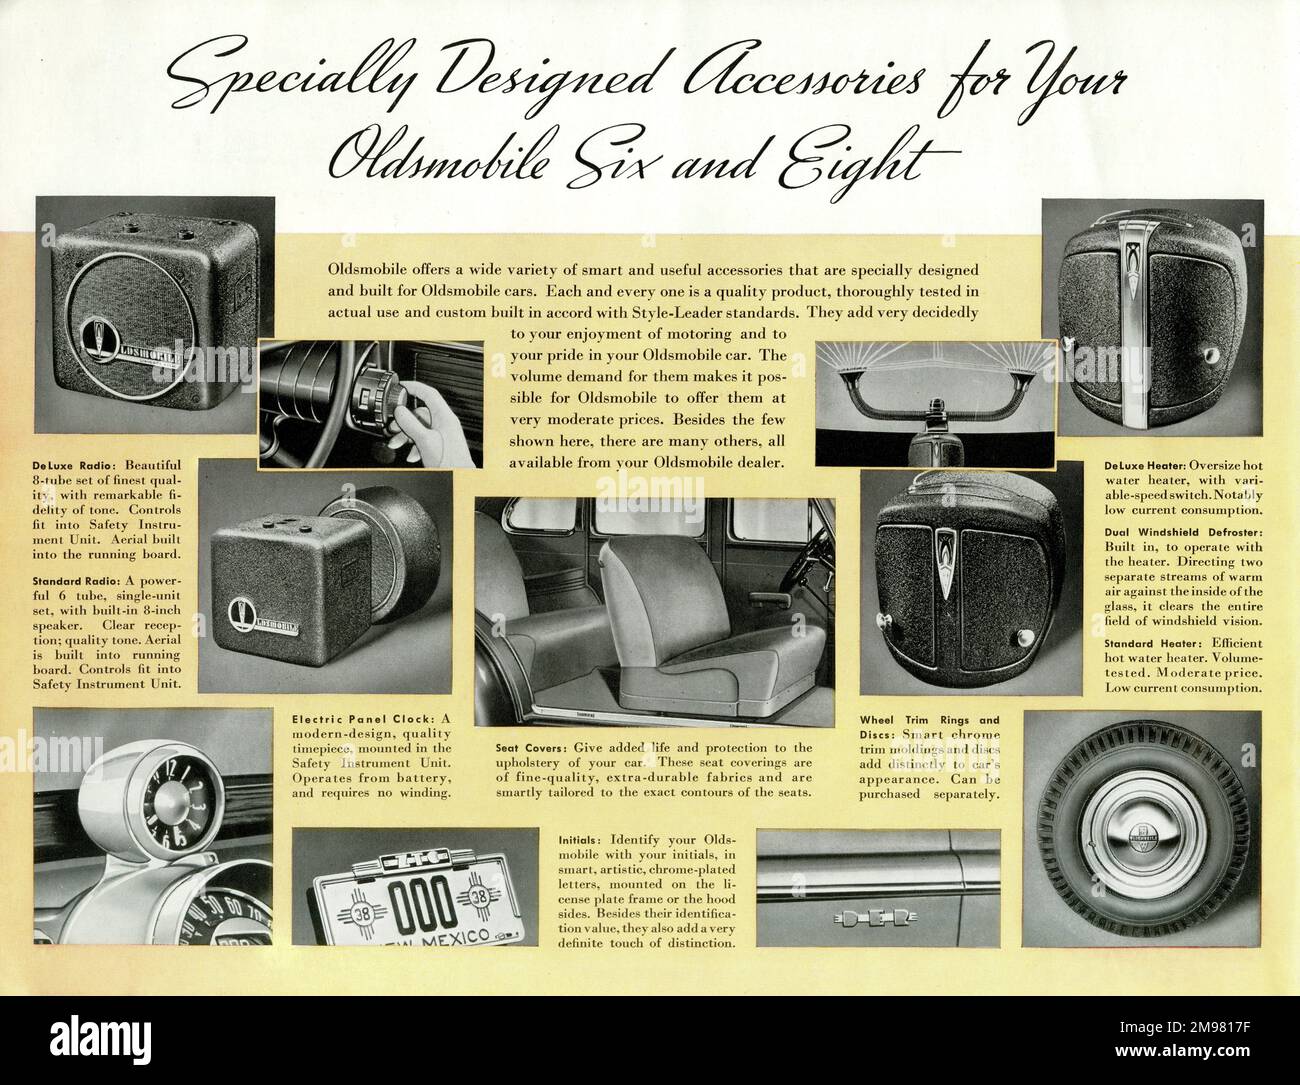 Brochure page, Oldsmobile Six and Eight specially designed accessories -- radios, heaters, defroster, clock, seat covers, identity initials, wheel trim rings and discs. Stock Photo